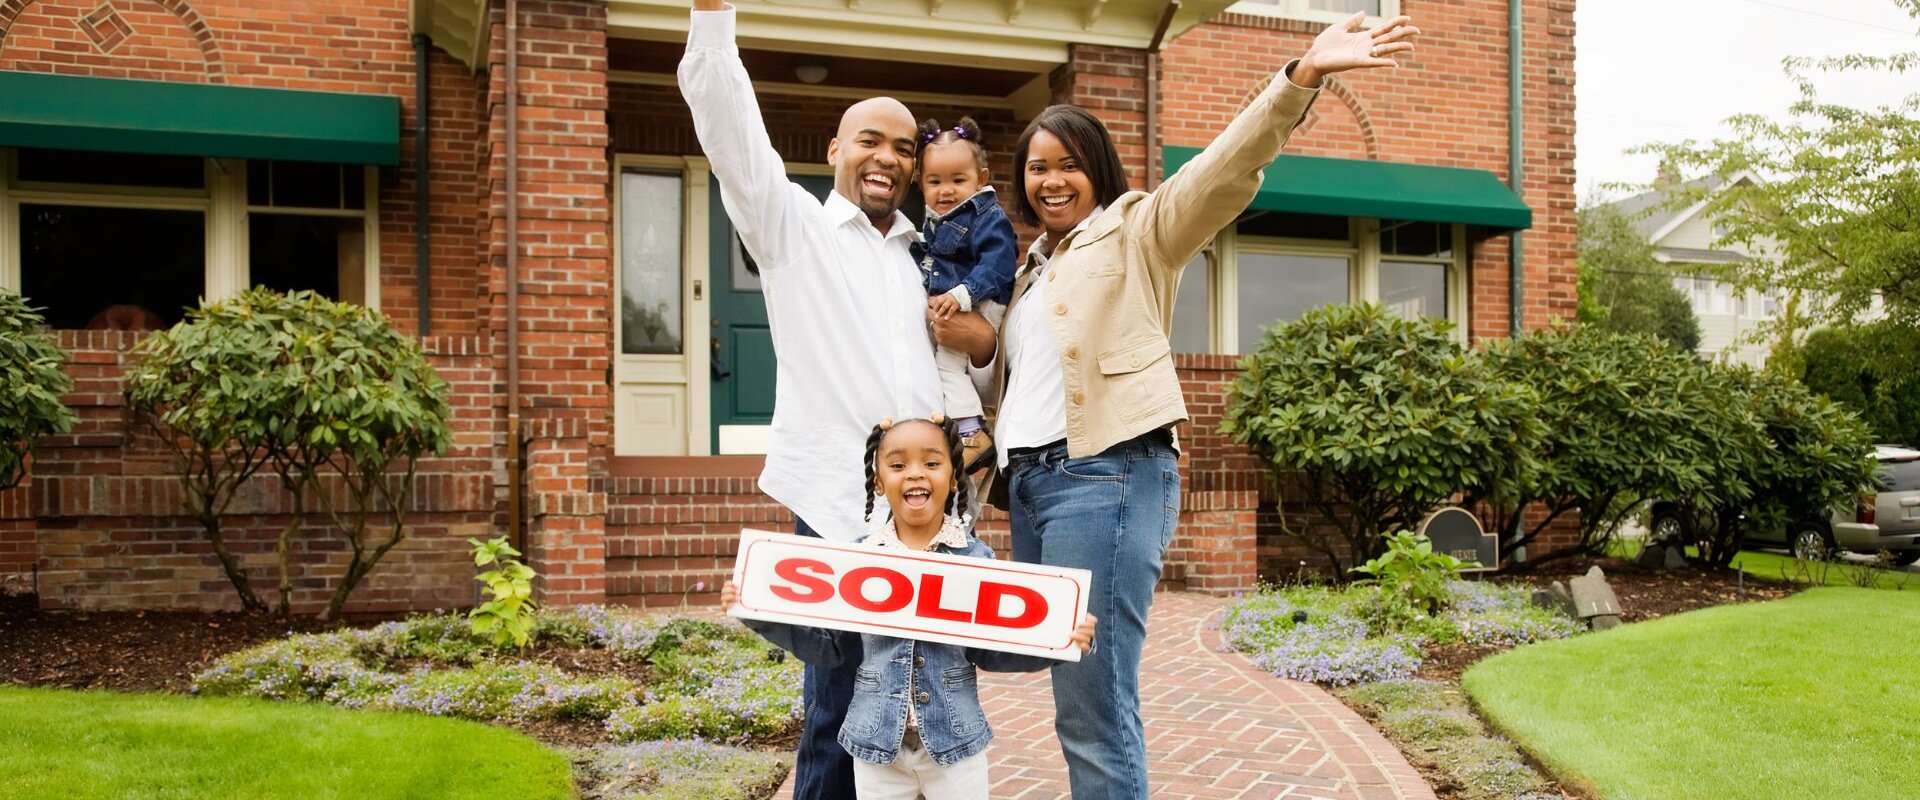 Advantages of Selling Your Home for Cash